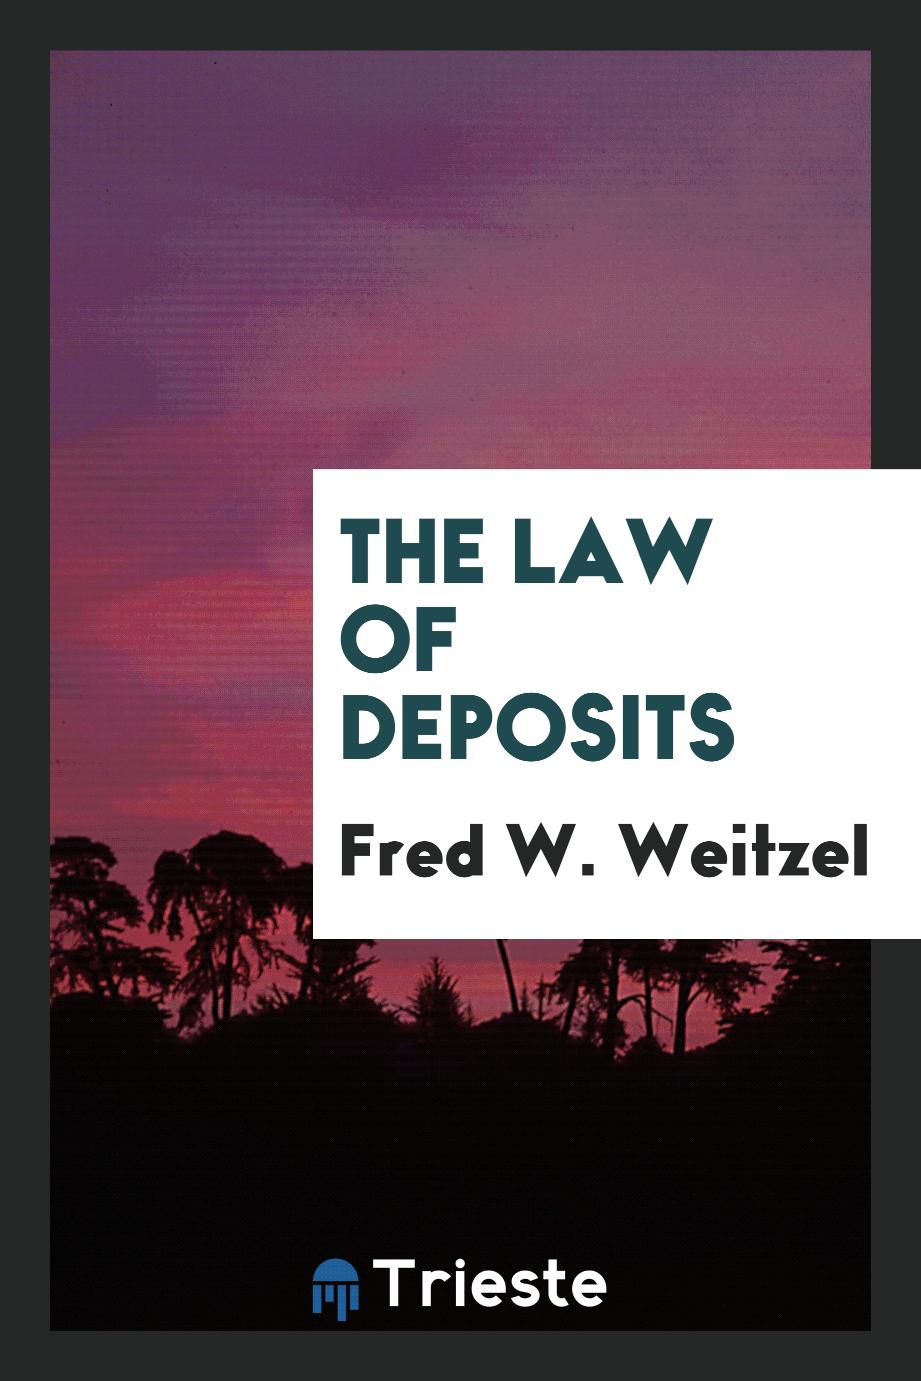 The Law of Deposits